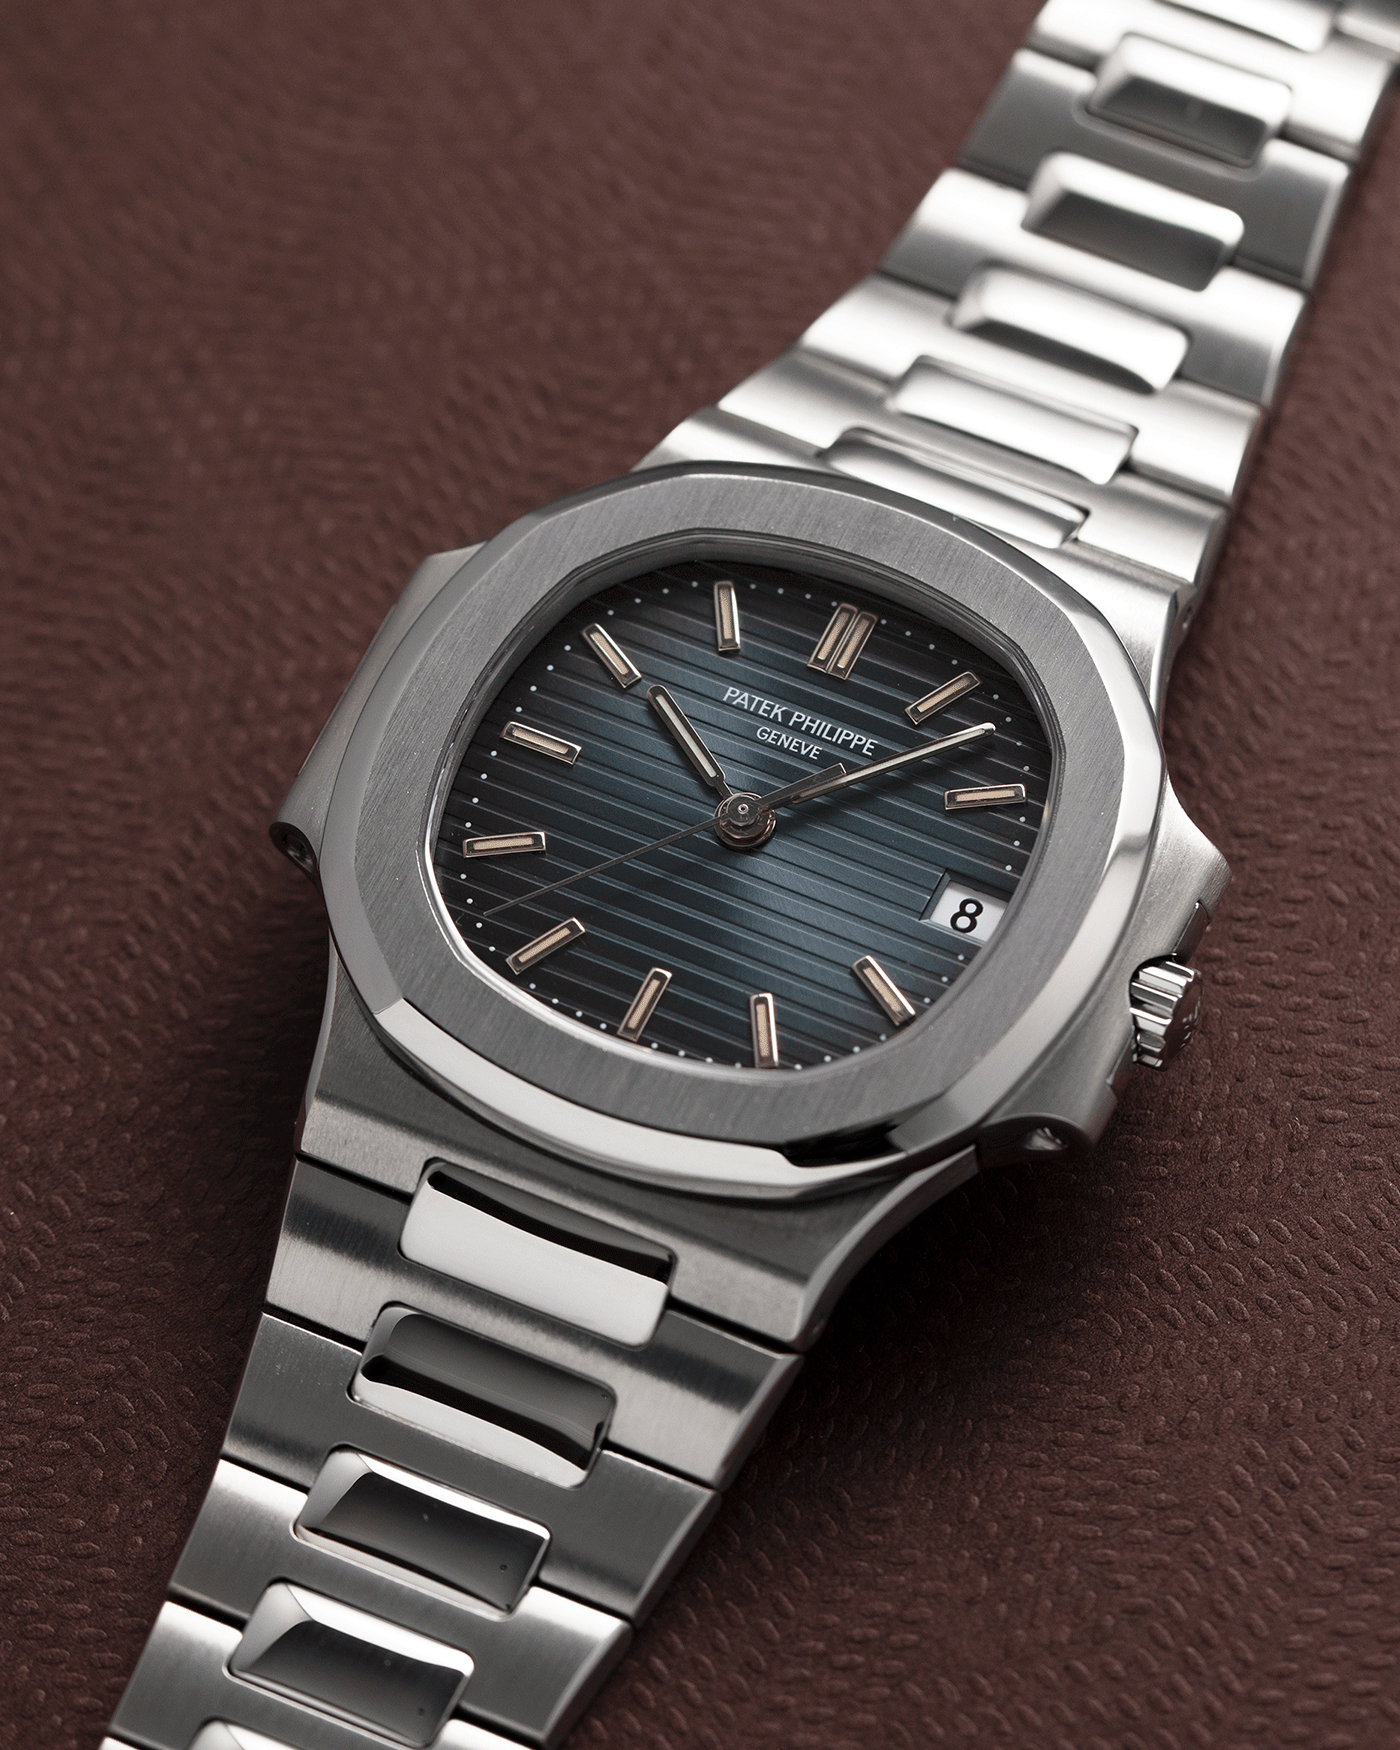 Patek Philippe Nautilus 3800 Watch | S.Song Timepieces – S.Song Watches